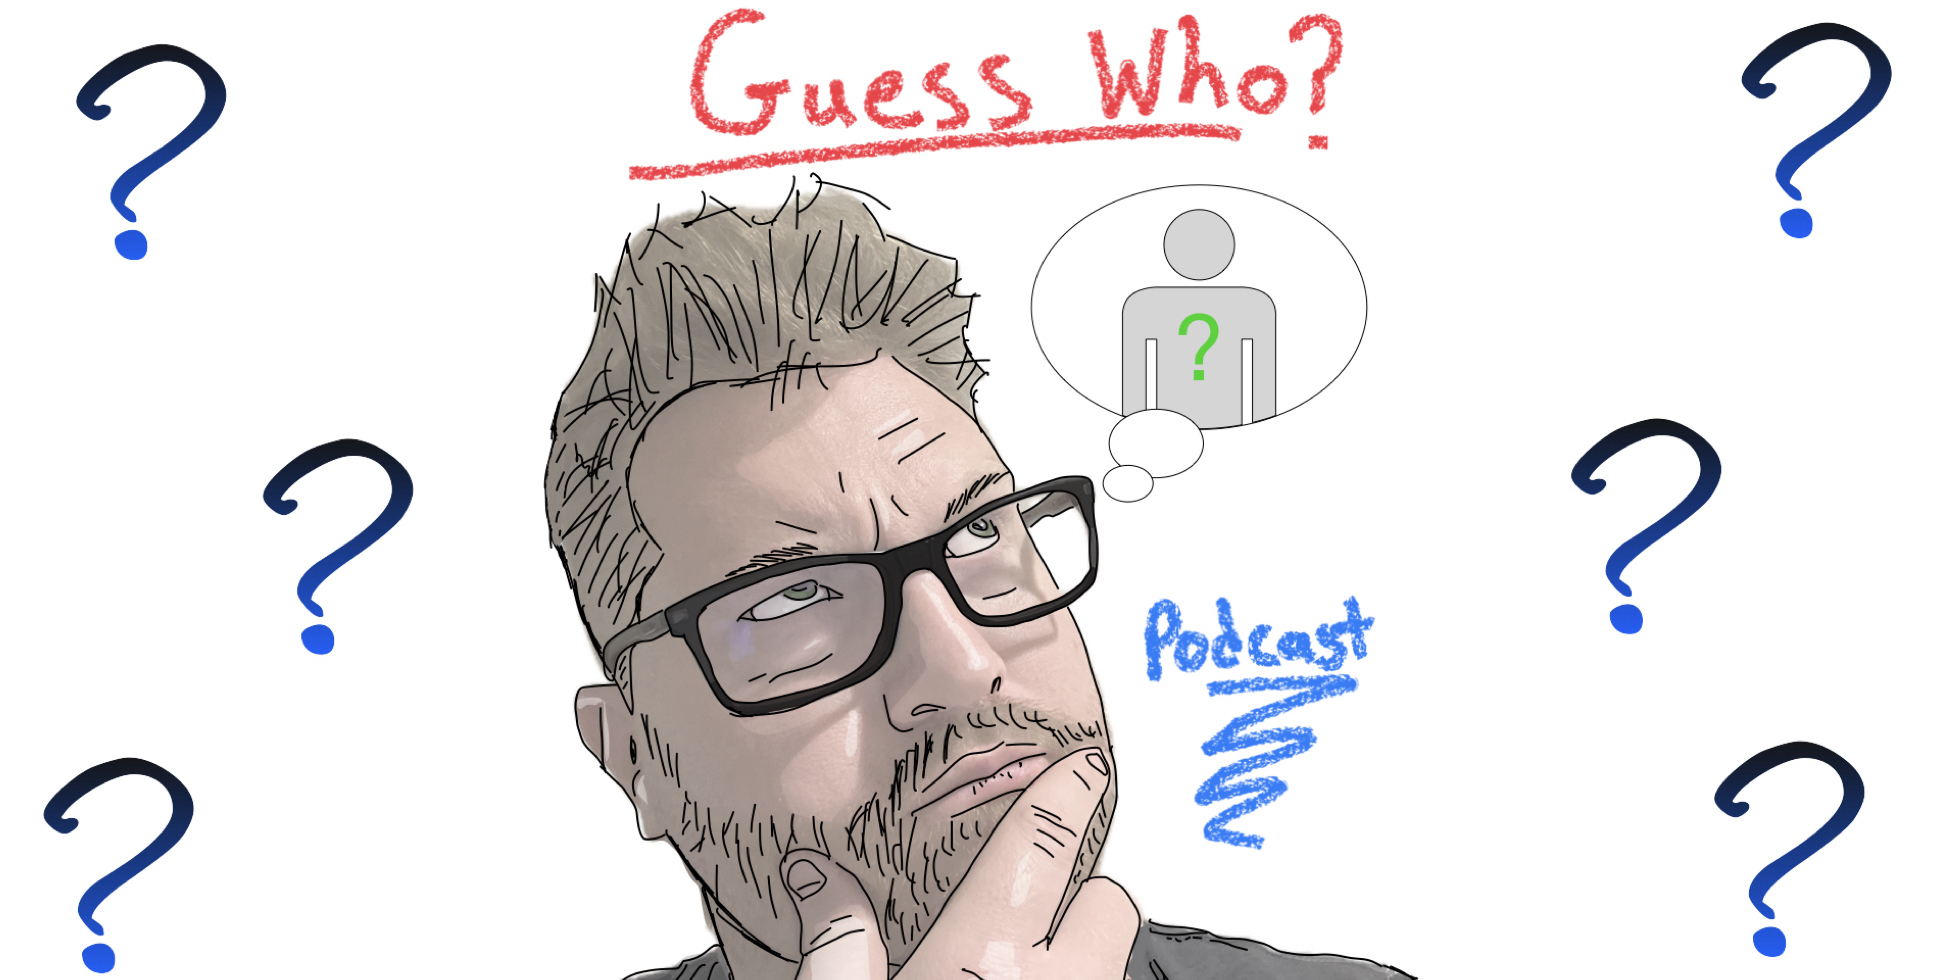 Image of a person looking up pensively with the words “Guess Who Podcast” and a thought bubble with an unknown figure inside.